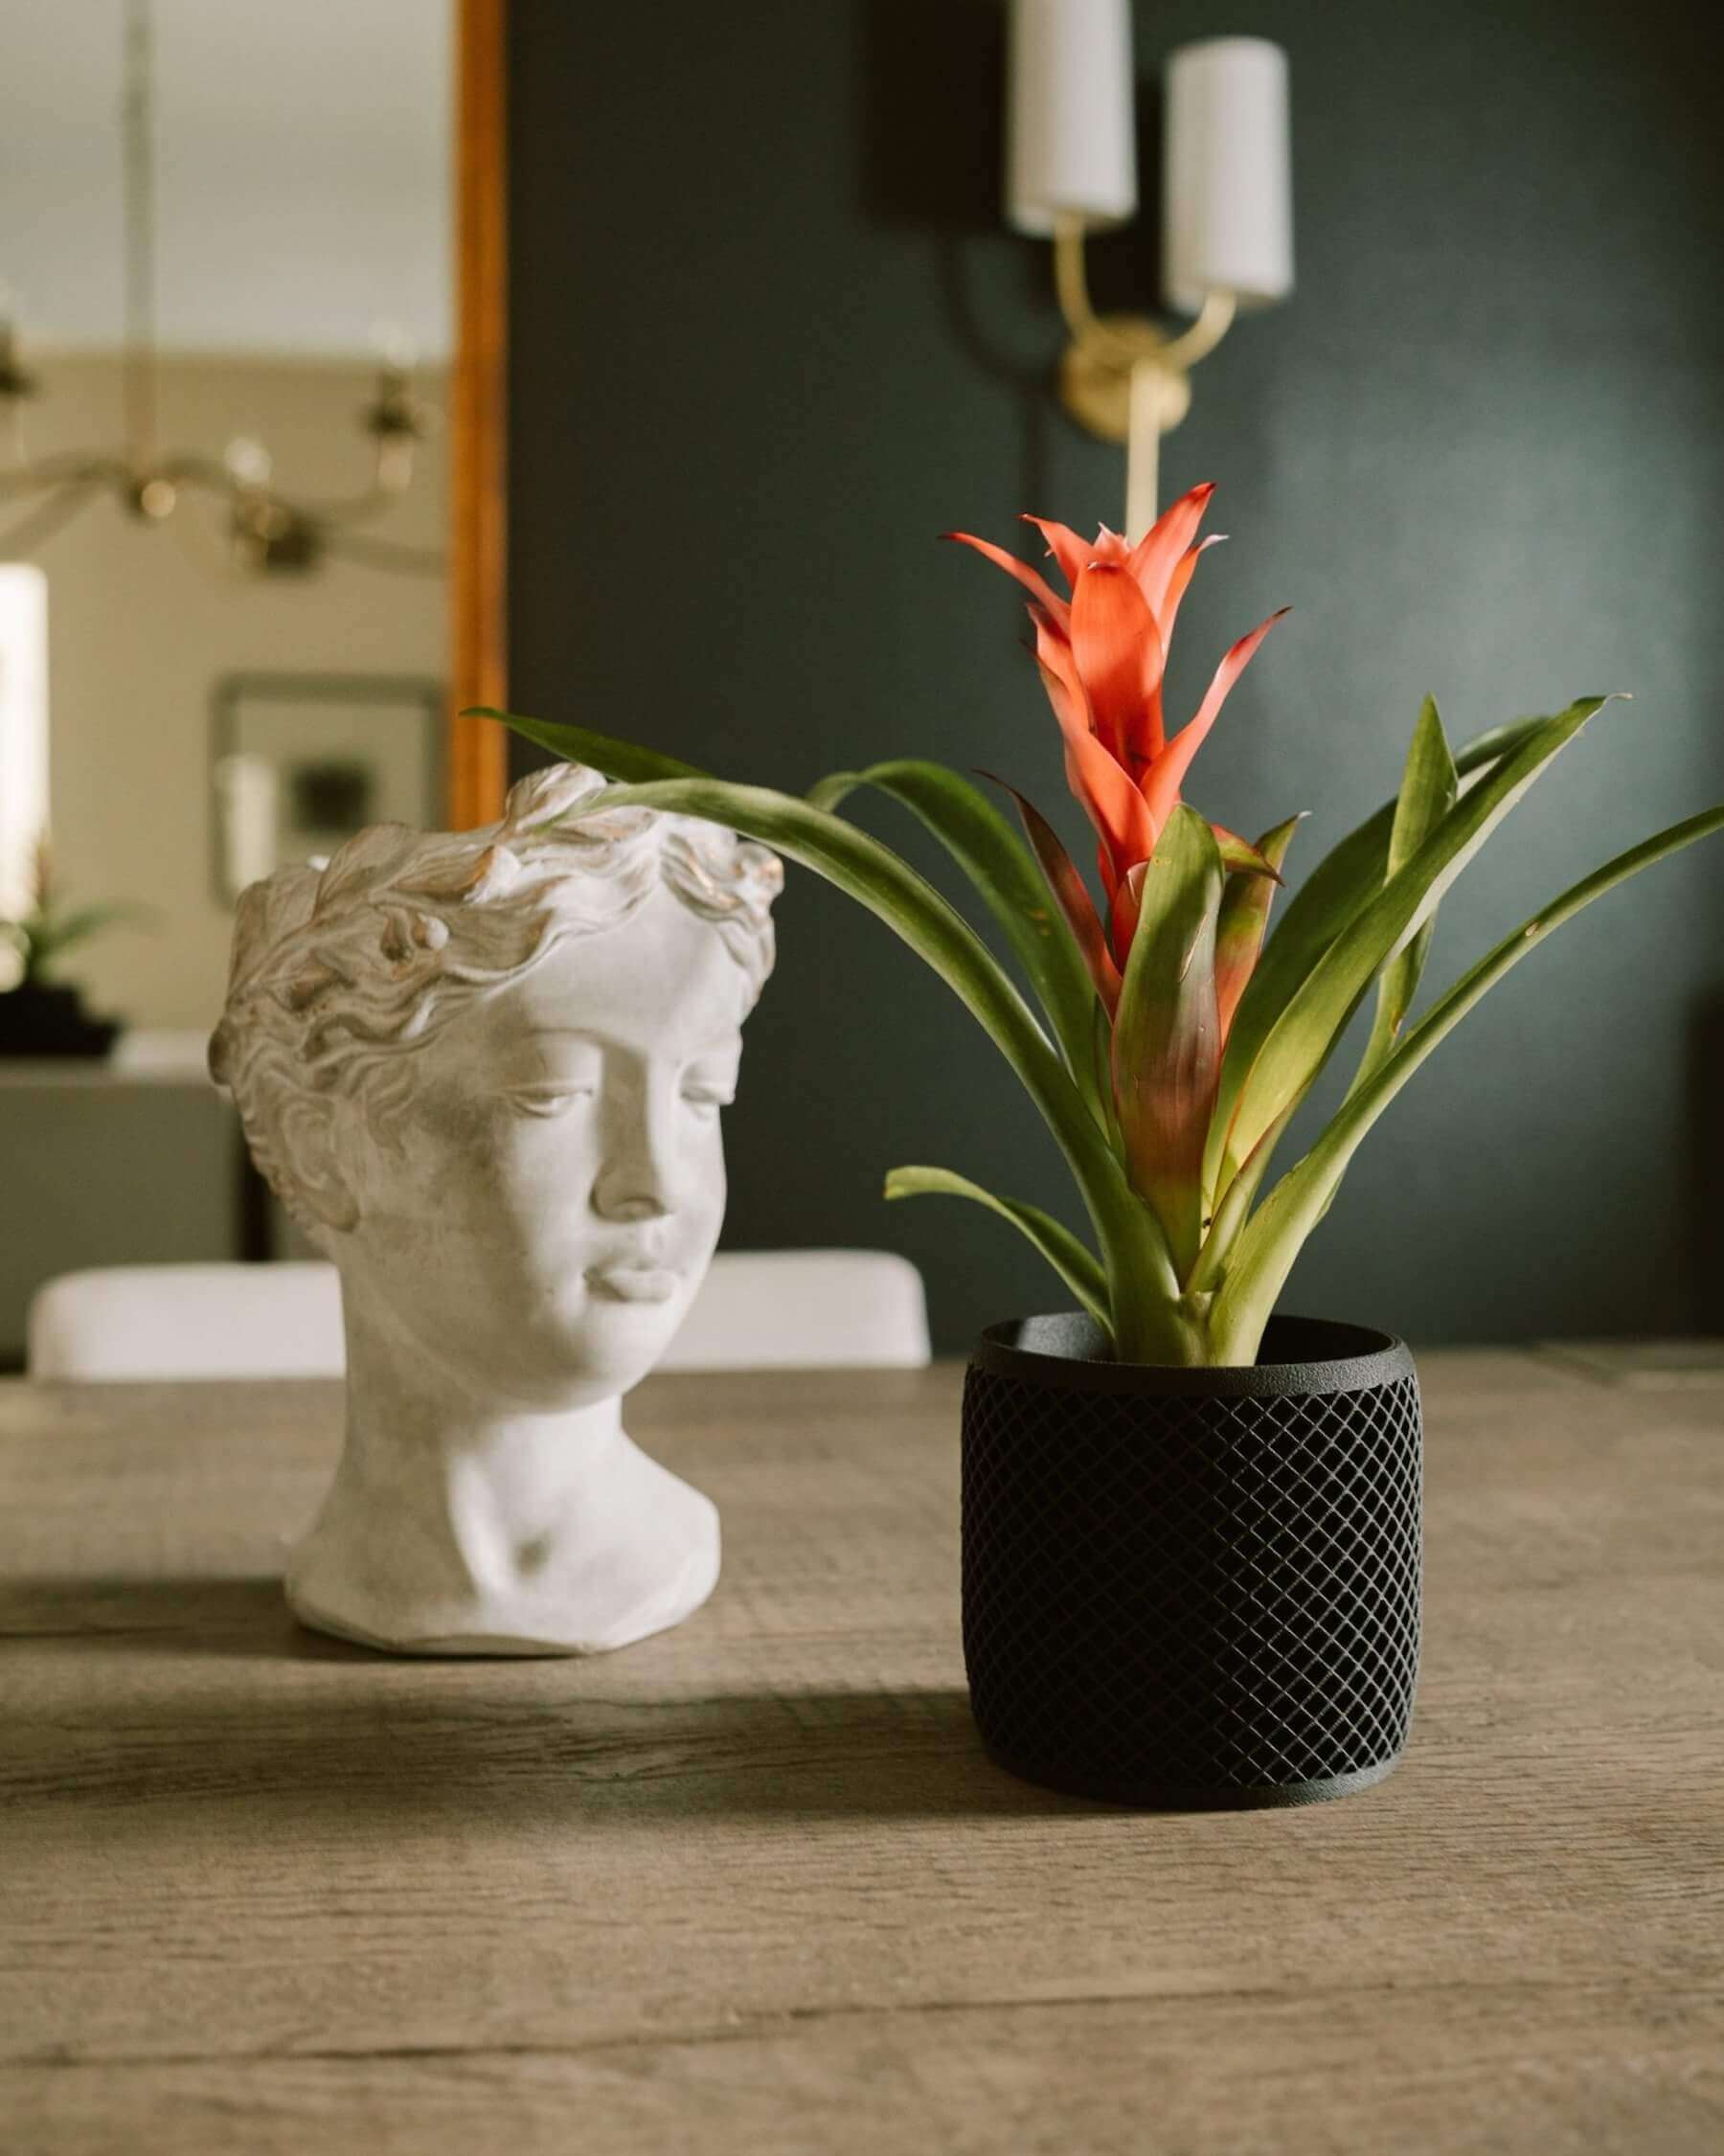 VISION modern black planter by Woodland Pulse. It is near a greek head statue on an elegant table.